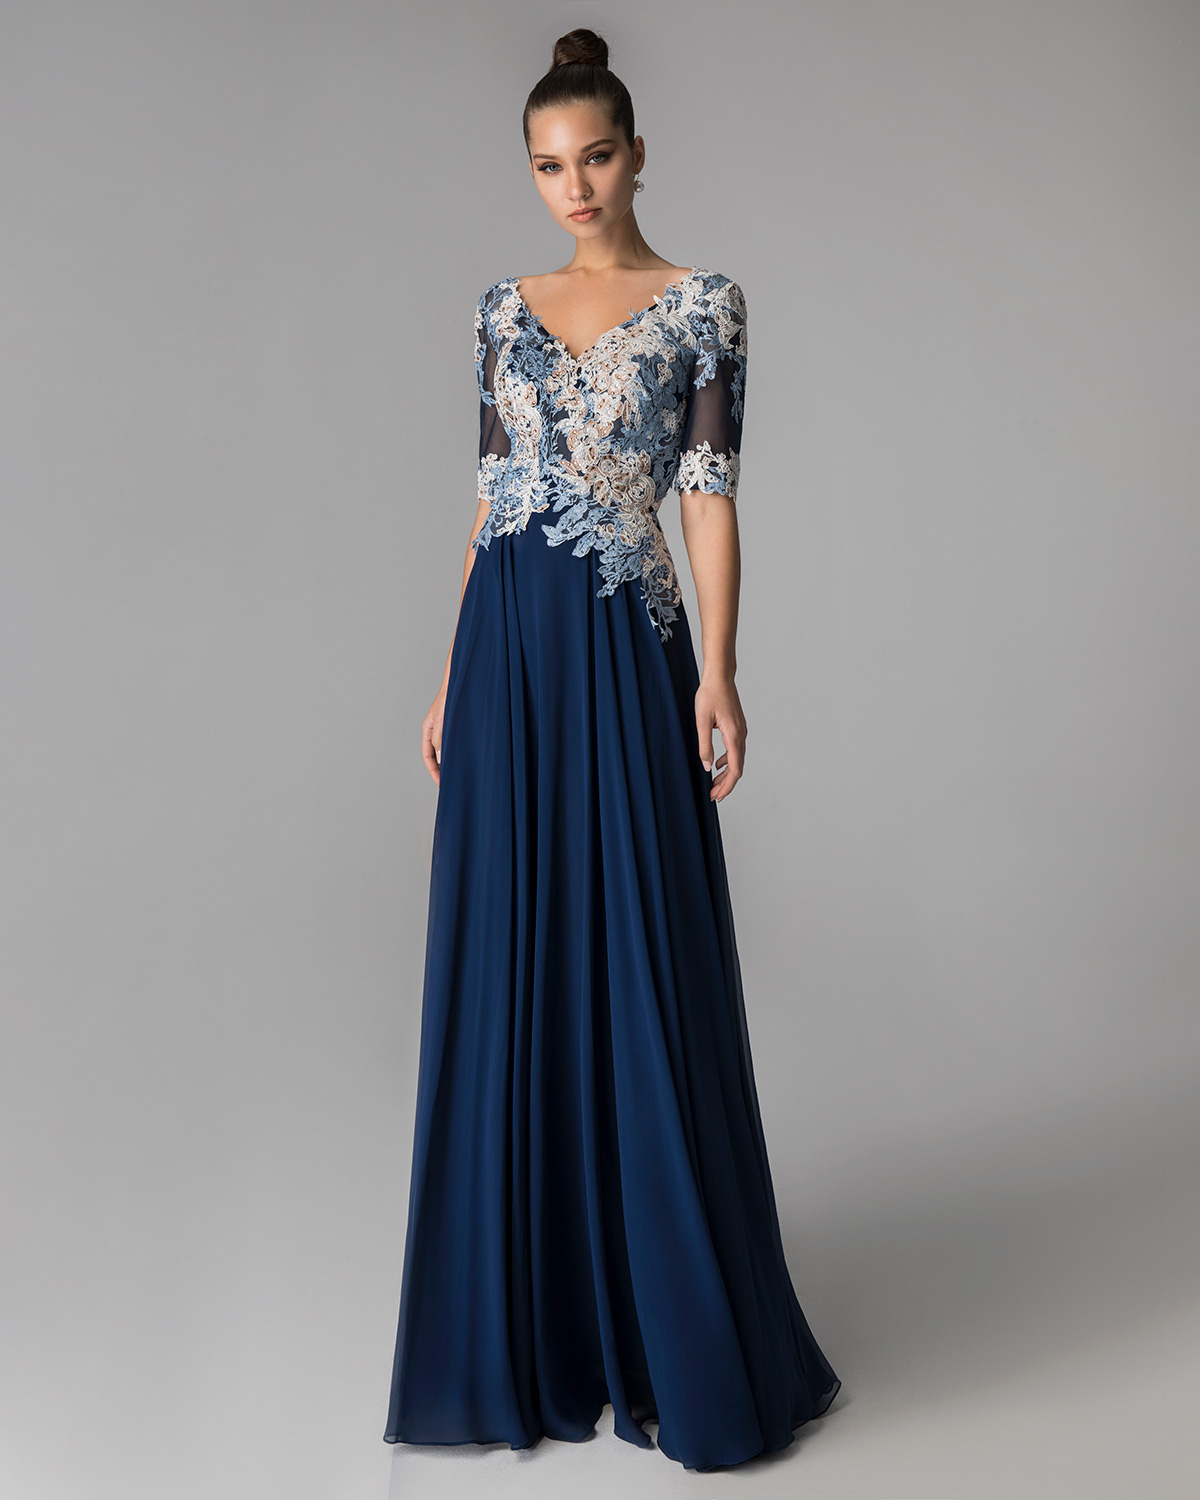 Классические платья / Long evening dress with applique lace on the top and short sleeves